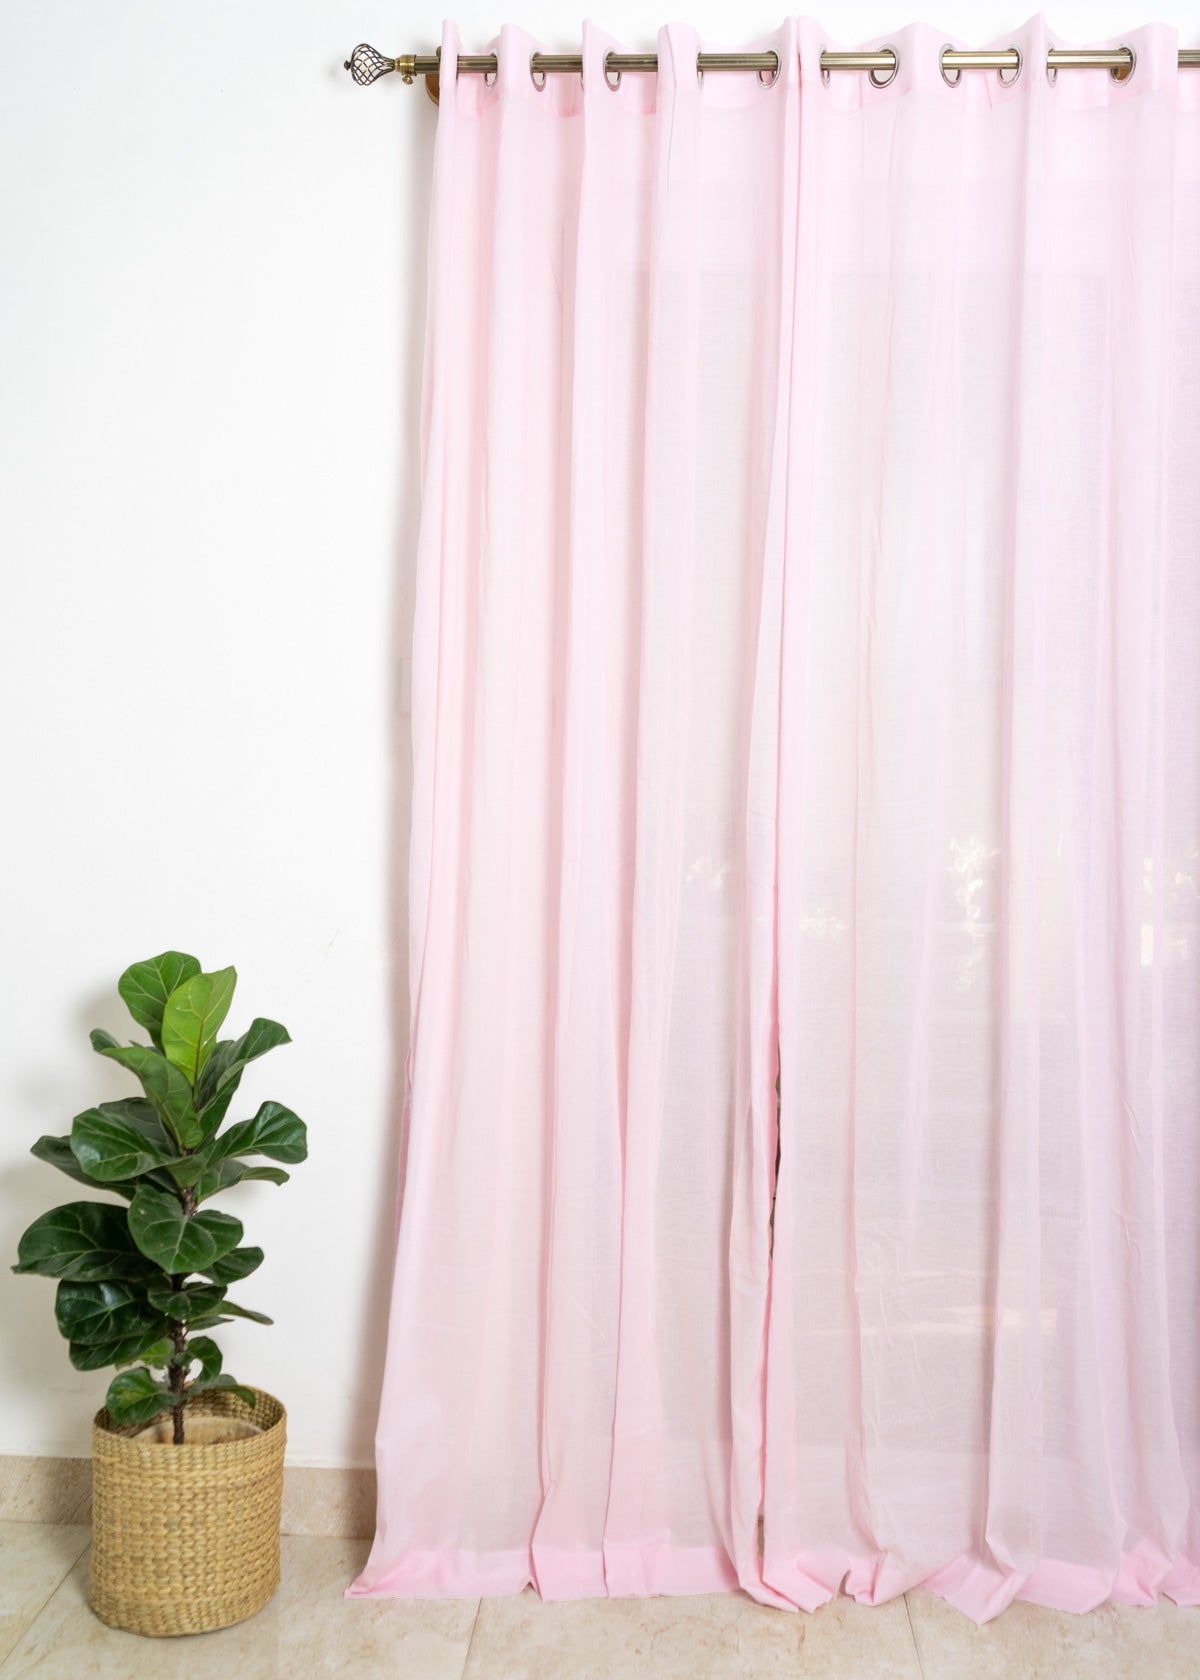 Solid Powder pink 100% cotton plain curtain for Living room & bedroom - Light filtering - Pack of 1